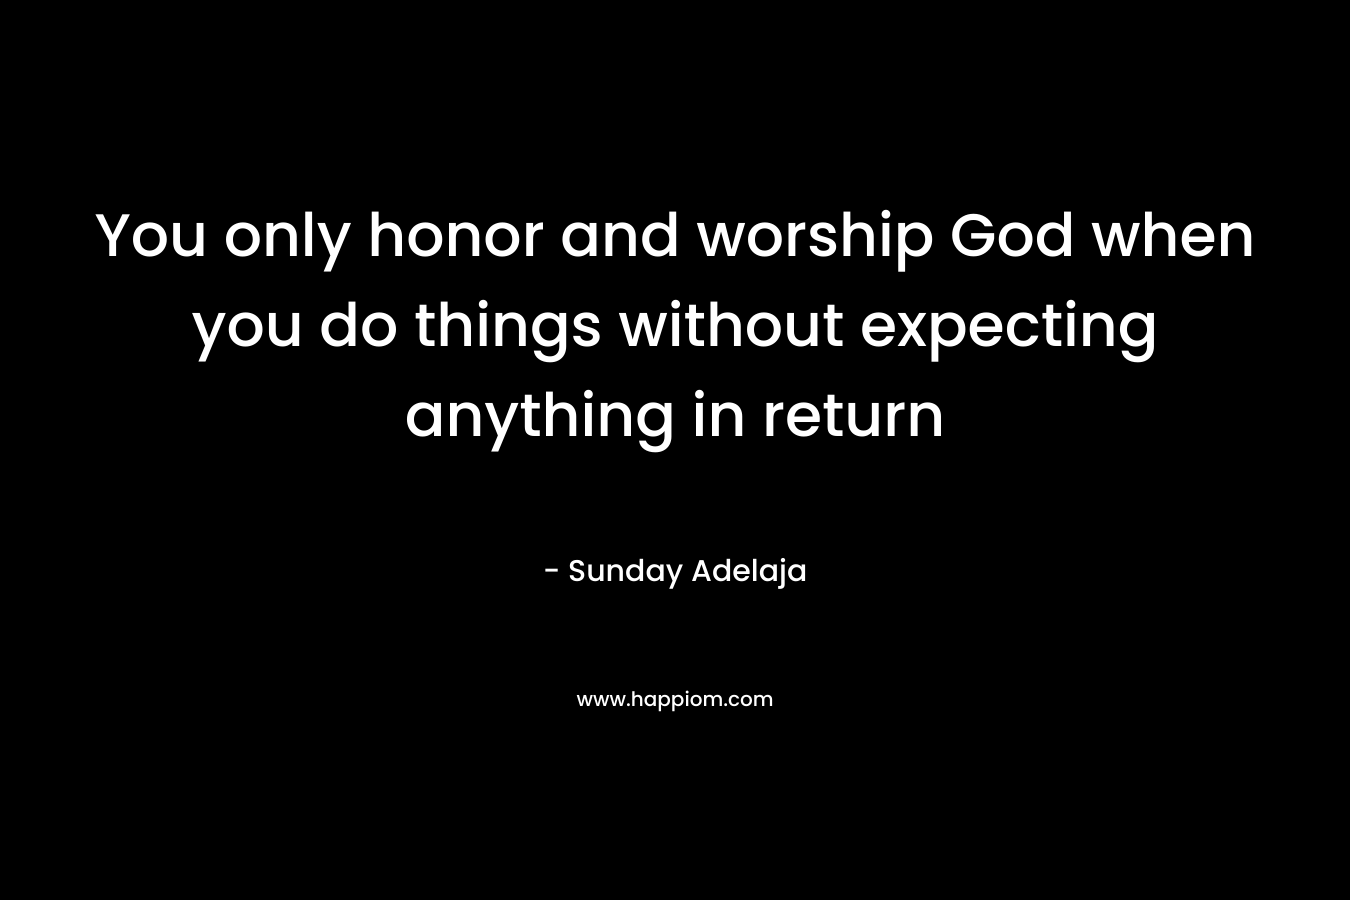 You only honor and worship God when you do things without expecting anything in return